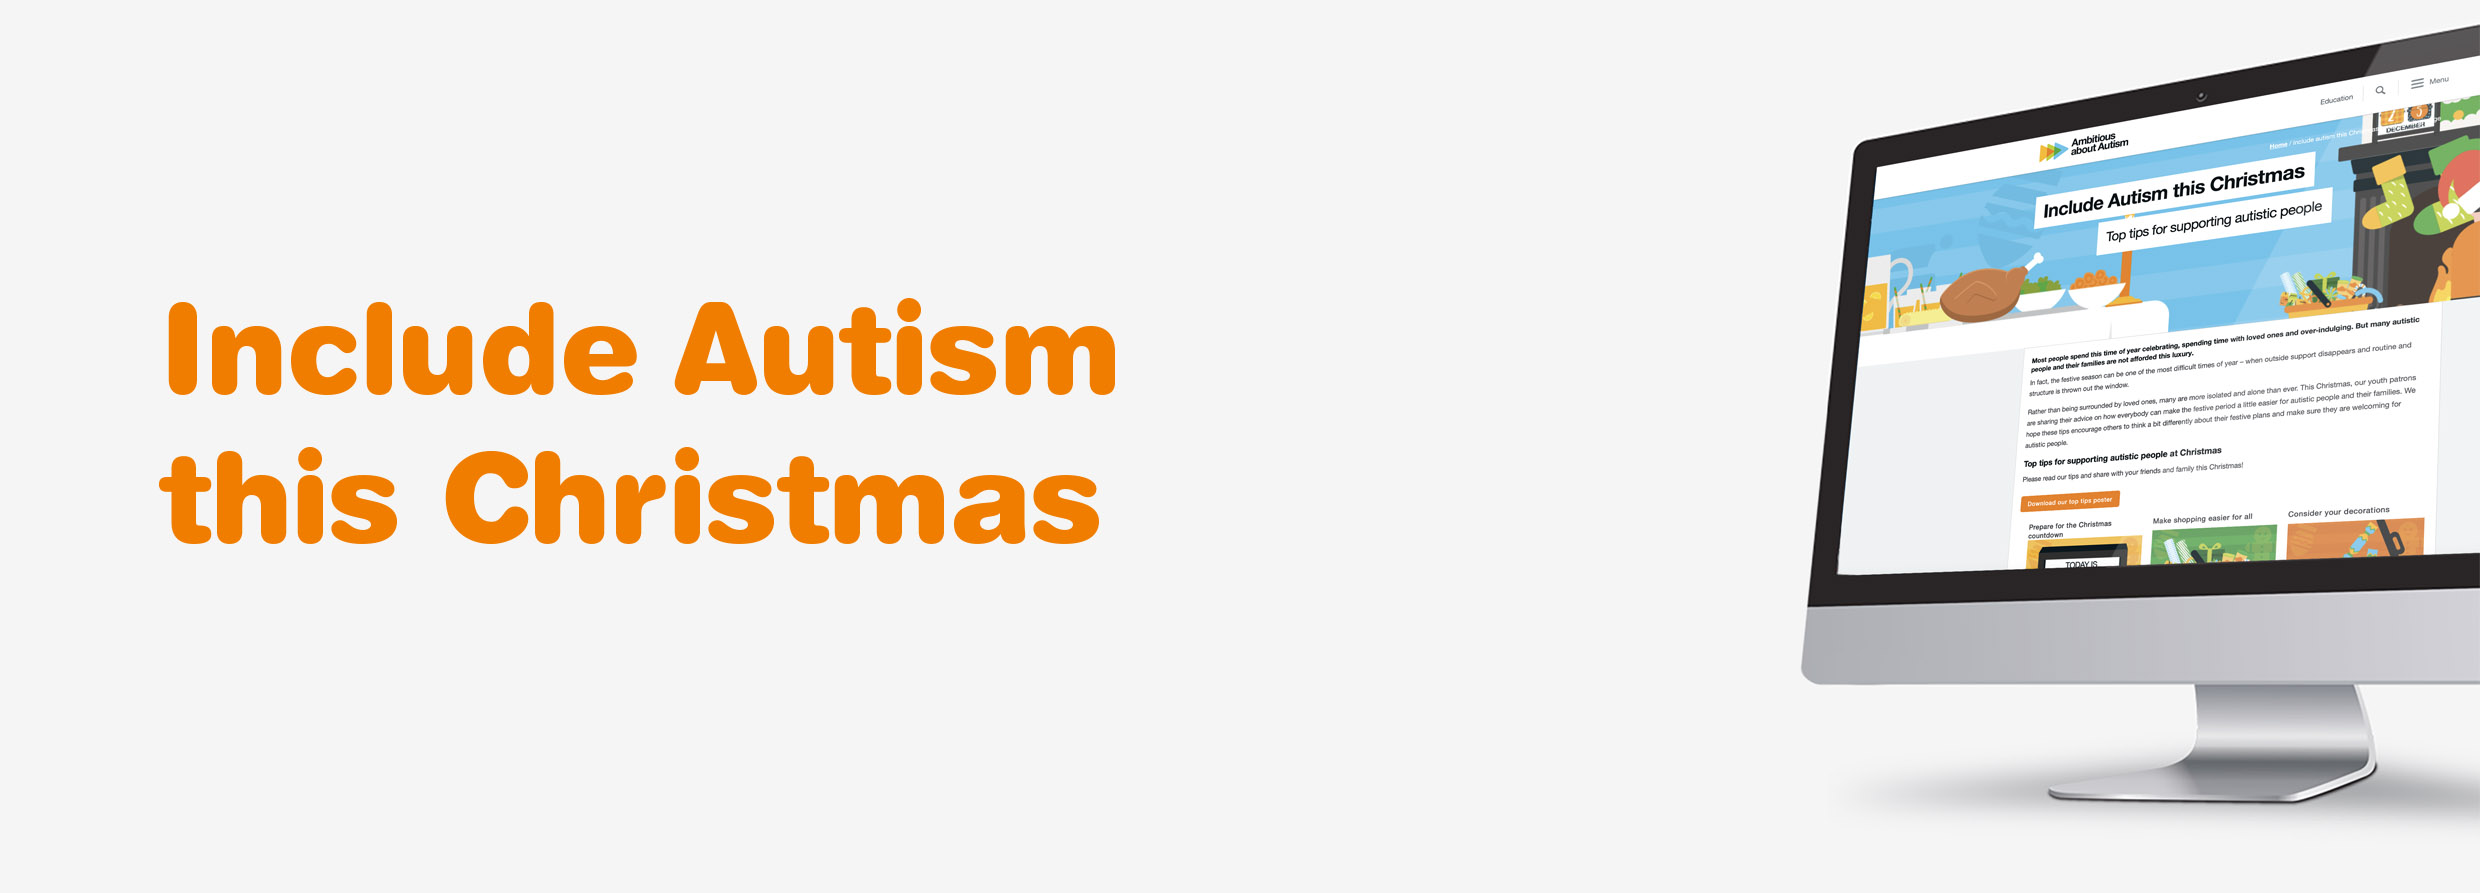 Ambitions about autism Include autism toolkit